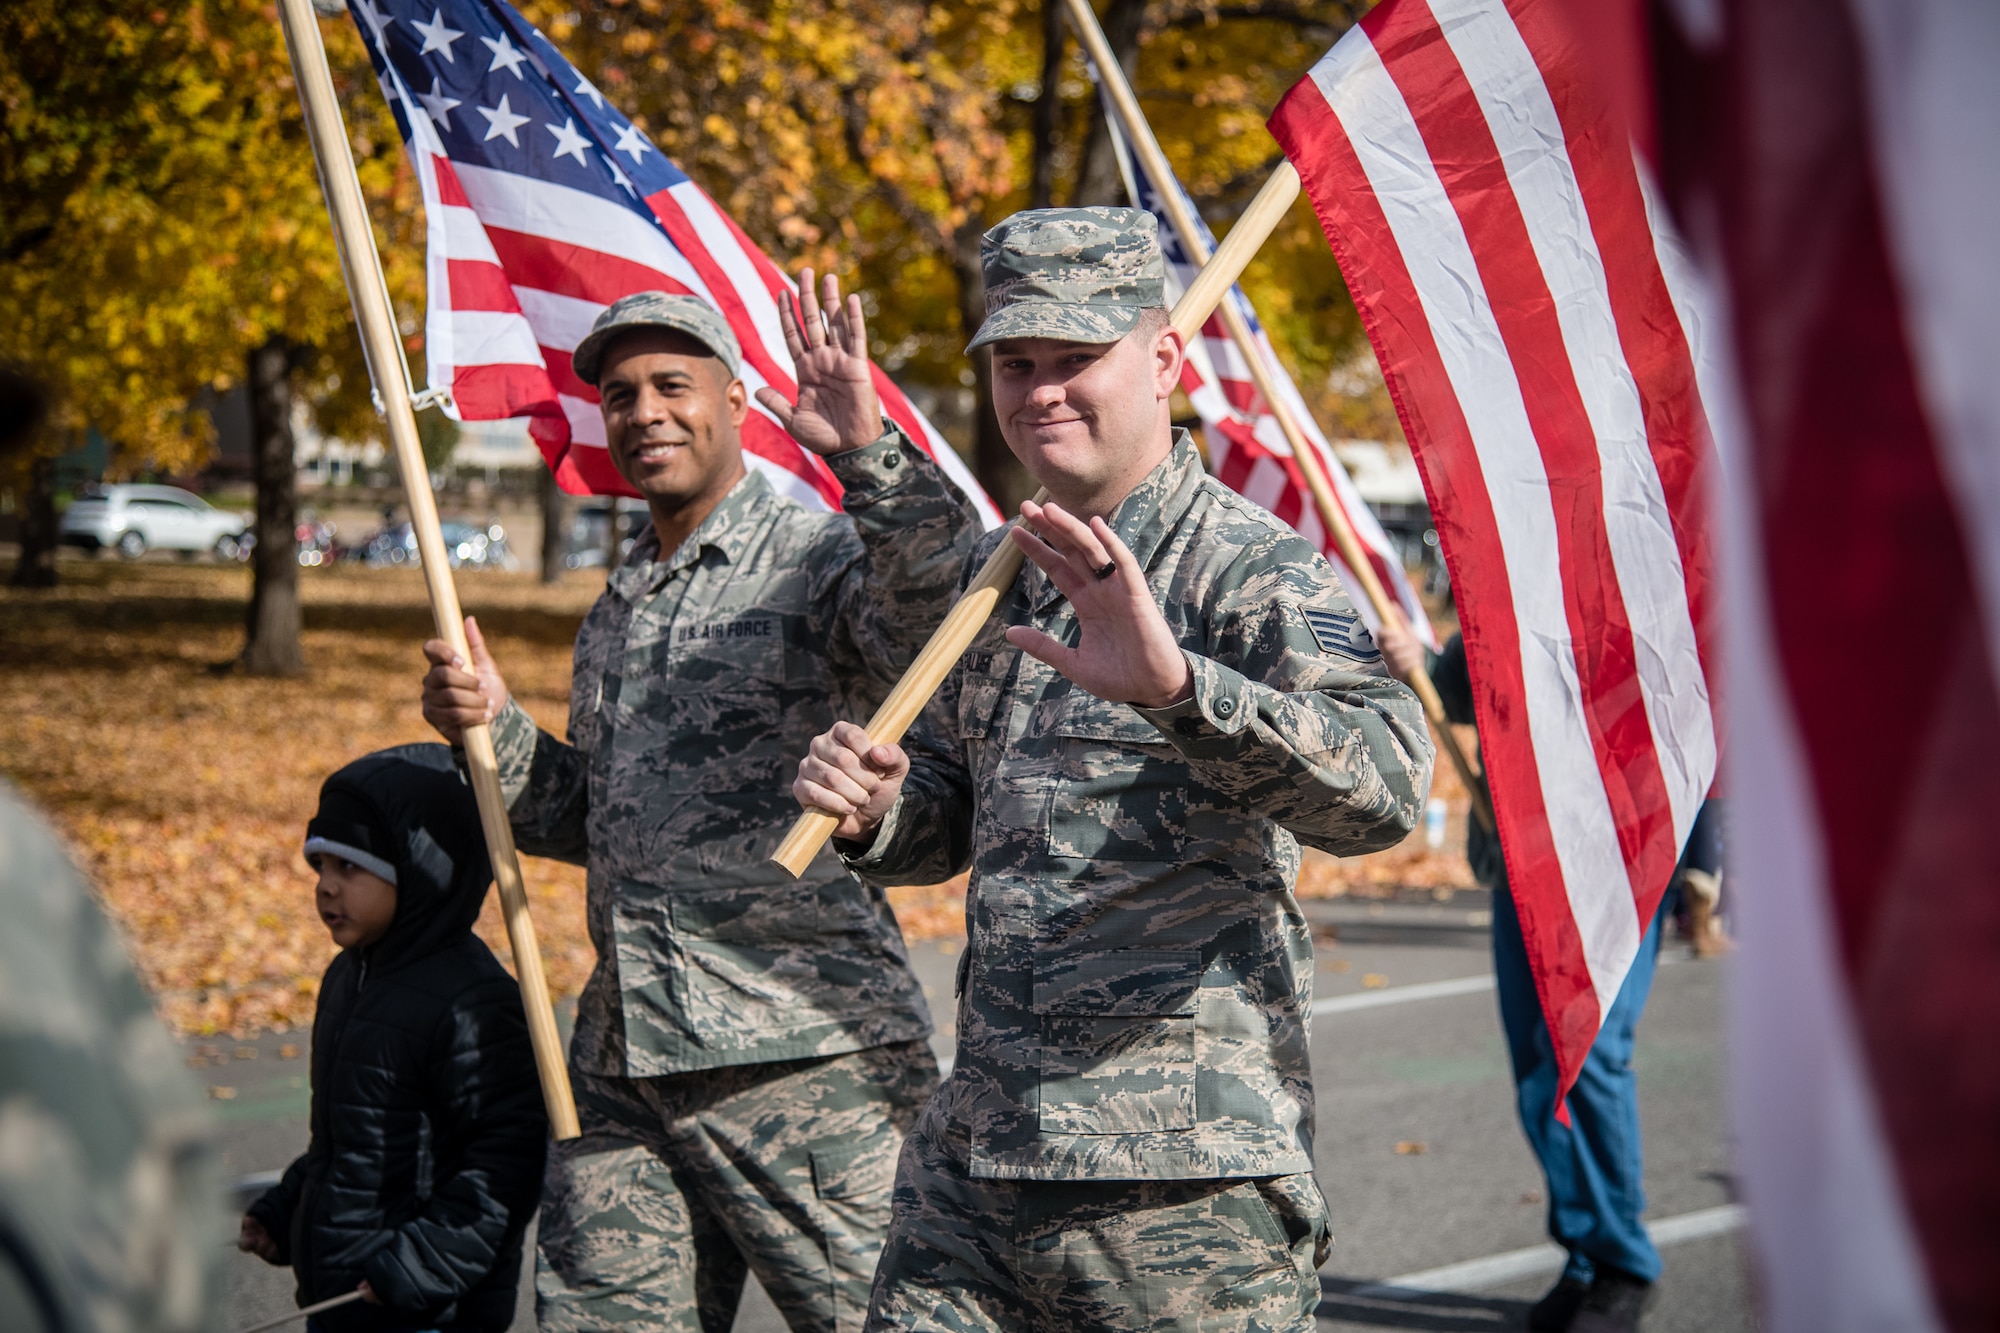 U.S Air Force Reserve Command Citizen Airmen from the 932nd Airlift Wing joined with family and friends to honor all Veterans at the St. Louis Veterans Day Parade, downtown St. Louis, Missouri, Nov. 9, 2019.(U.S. Air Force photo by Christopher Parr)